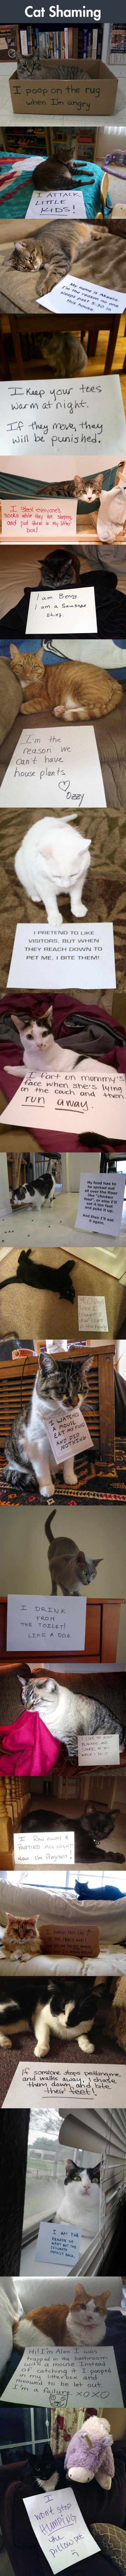 cat shaming funny picture